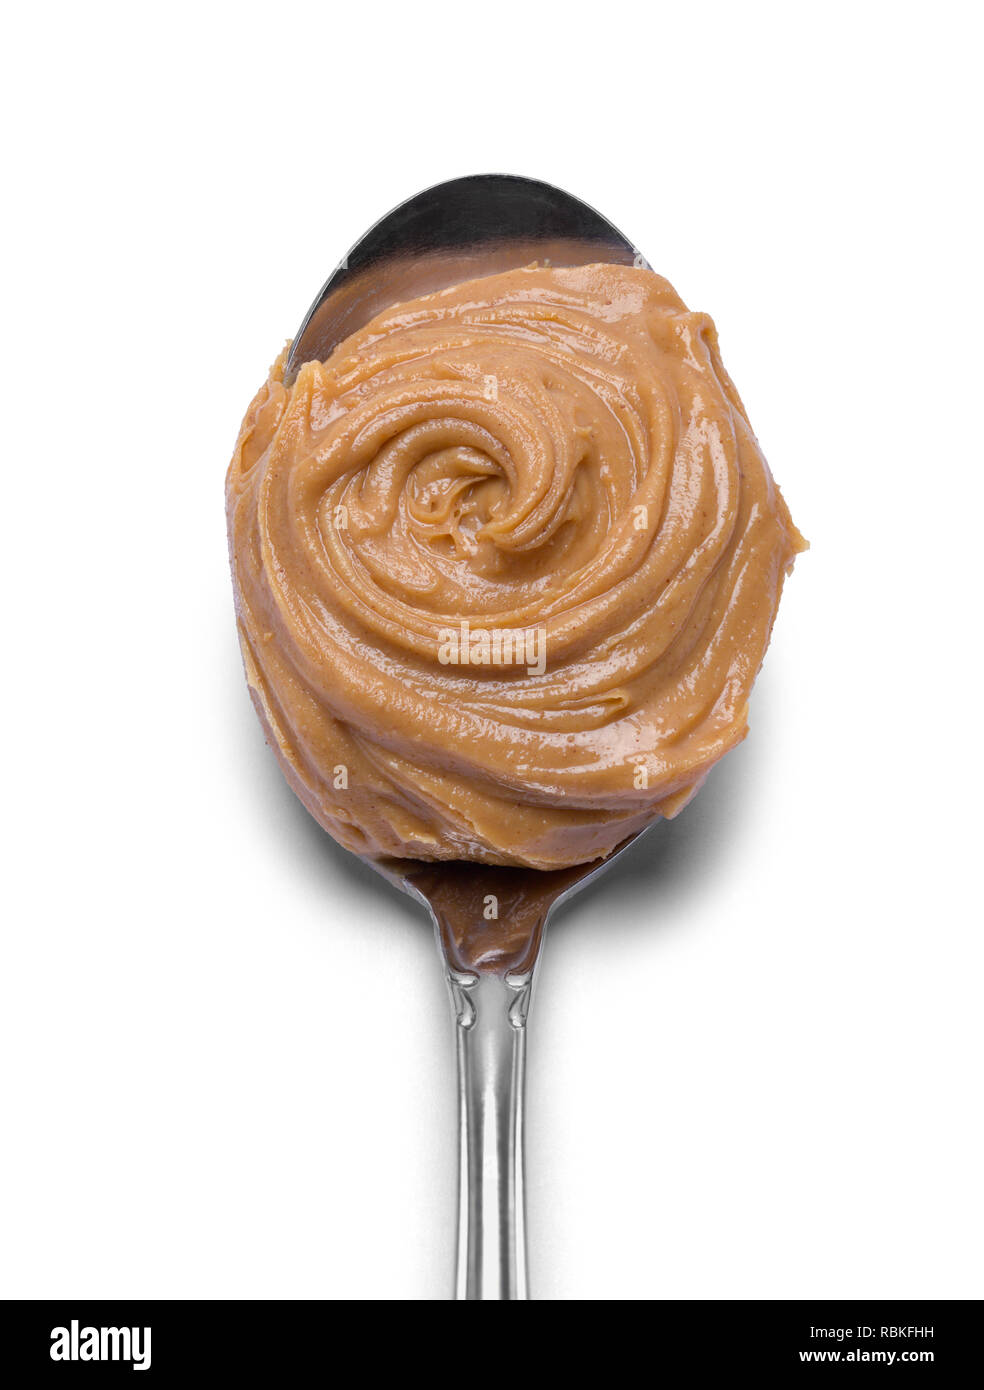 Wooden spoon with peanut butter Stock Photo by ©wbbstock 67585917